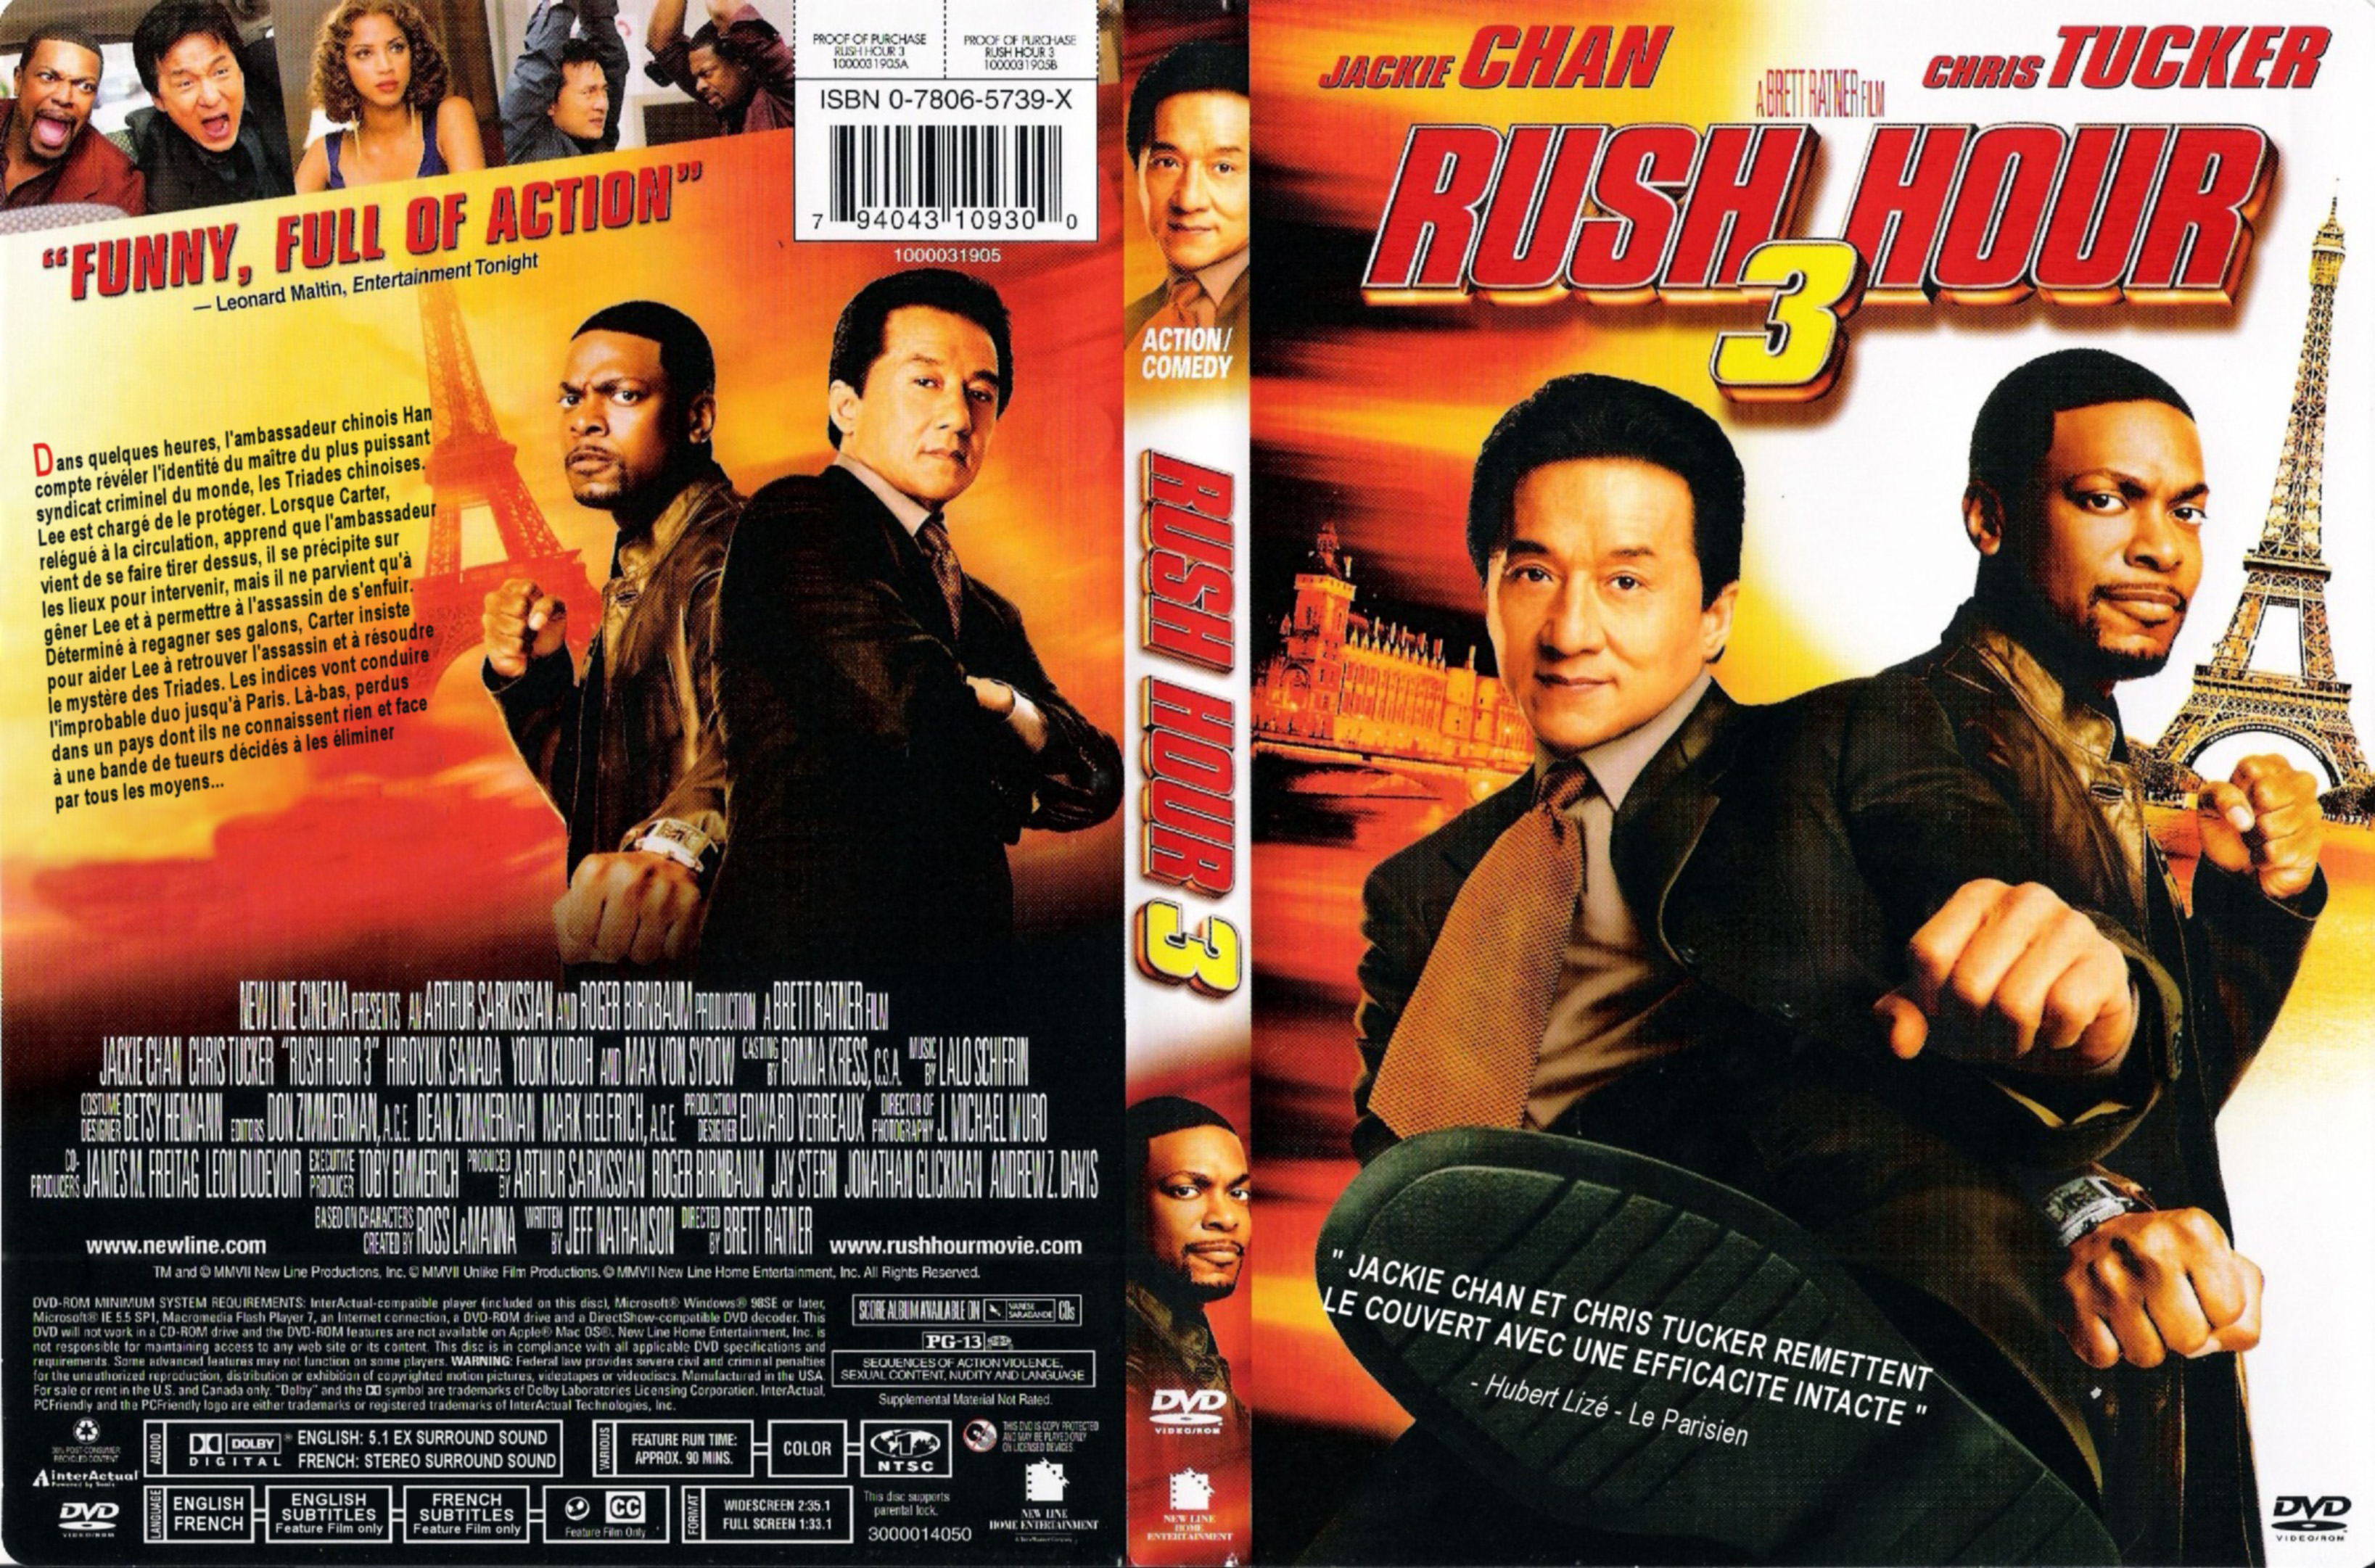 Jaquette DVD Rush hour 3 Zone 1